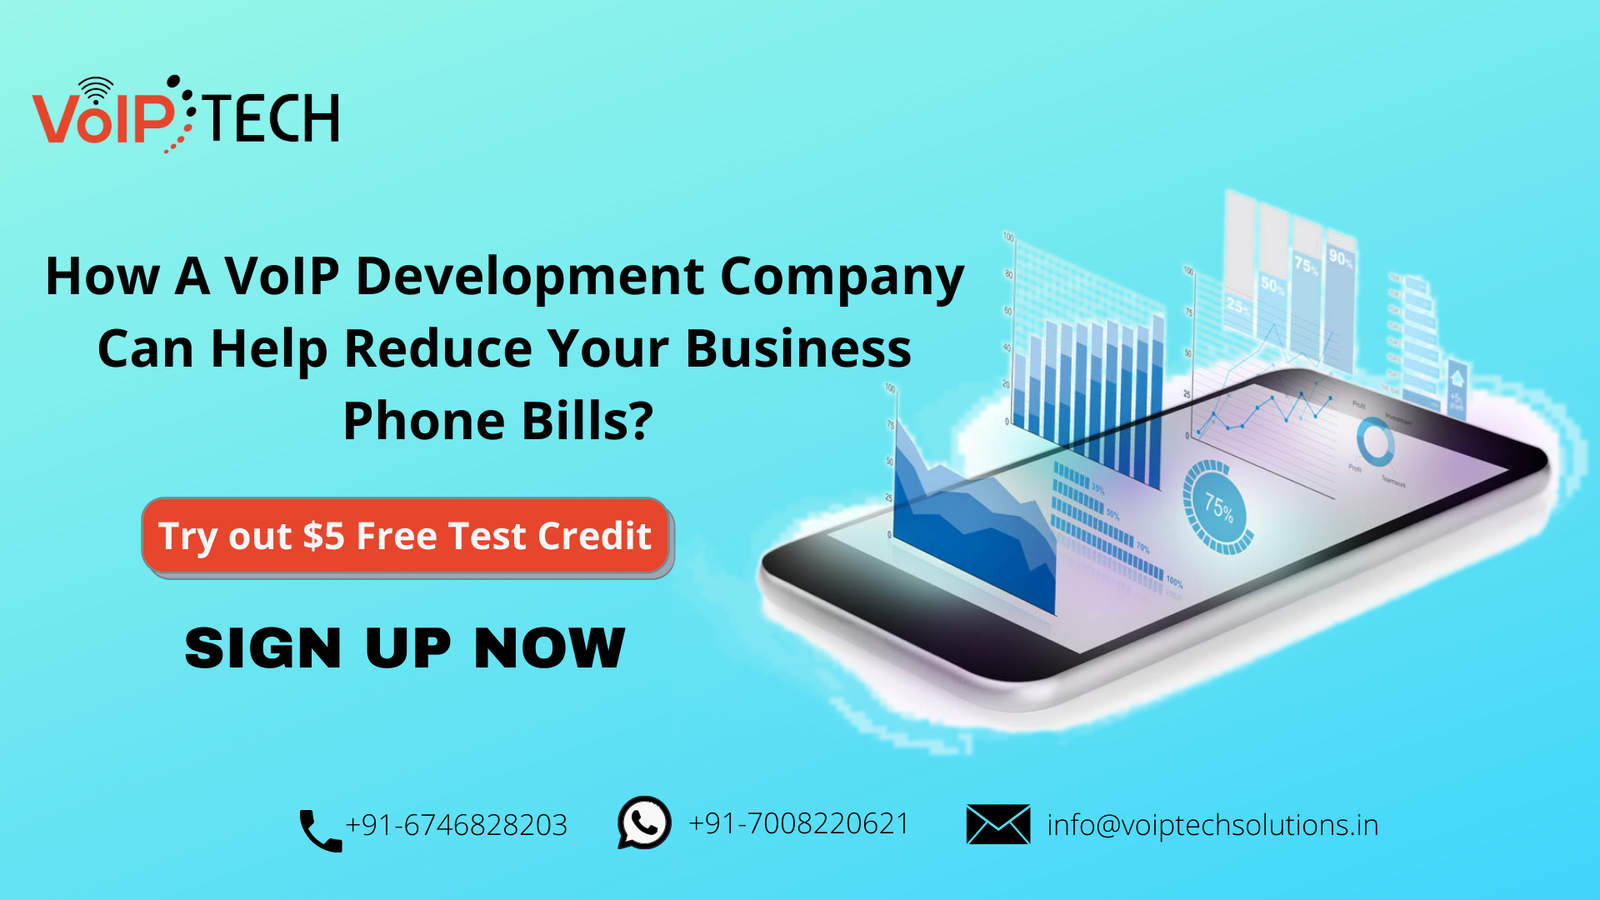 How A VoIP Development Company Can Help Reduce Your Business Phone Bills?, VoIP Development Company,  VoIP tech solutions, vici dialer, virtual number, Voip Providers, voip services in india, best sip provider, business voip providers, VoIP Phone Numbers, voip minutes provider, top voip providers, voip minutes, International VoIP Provider